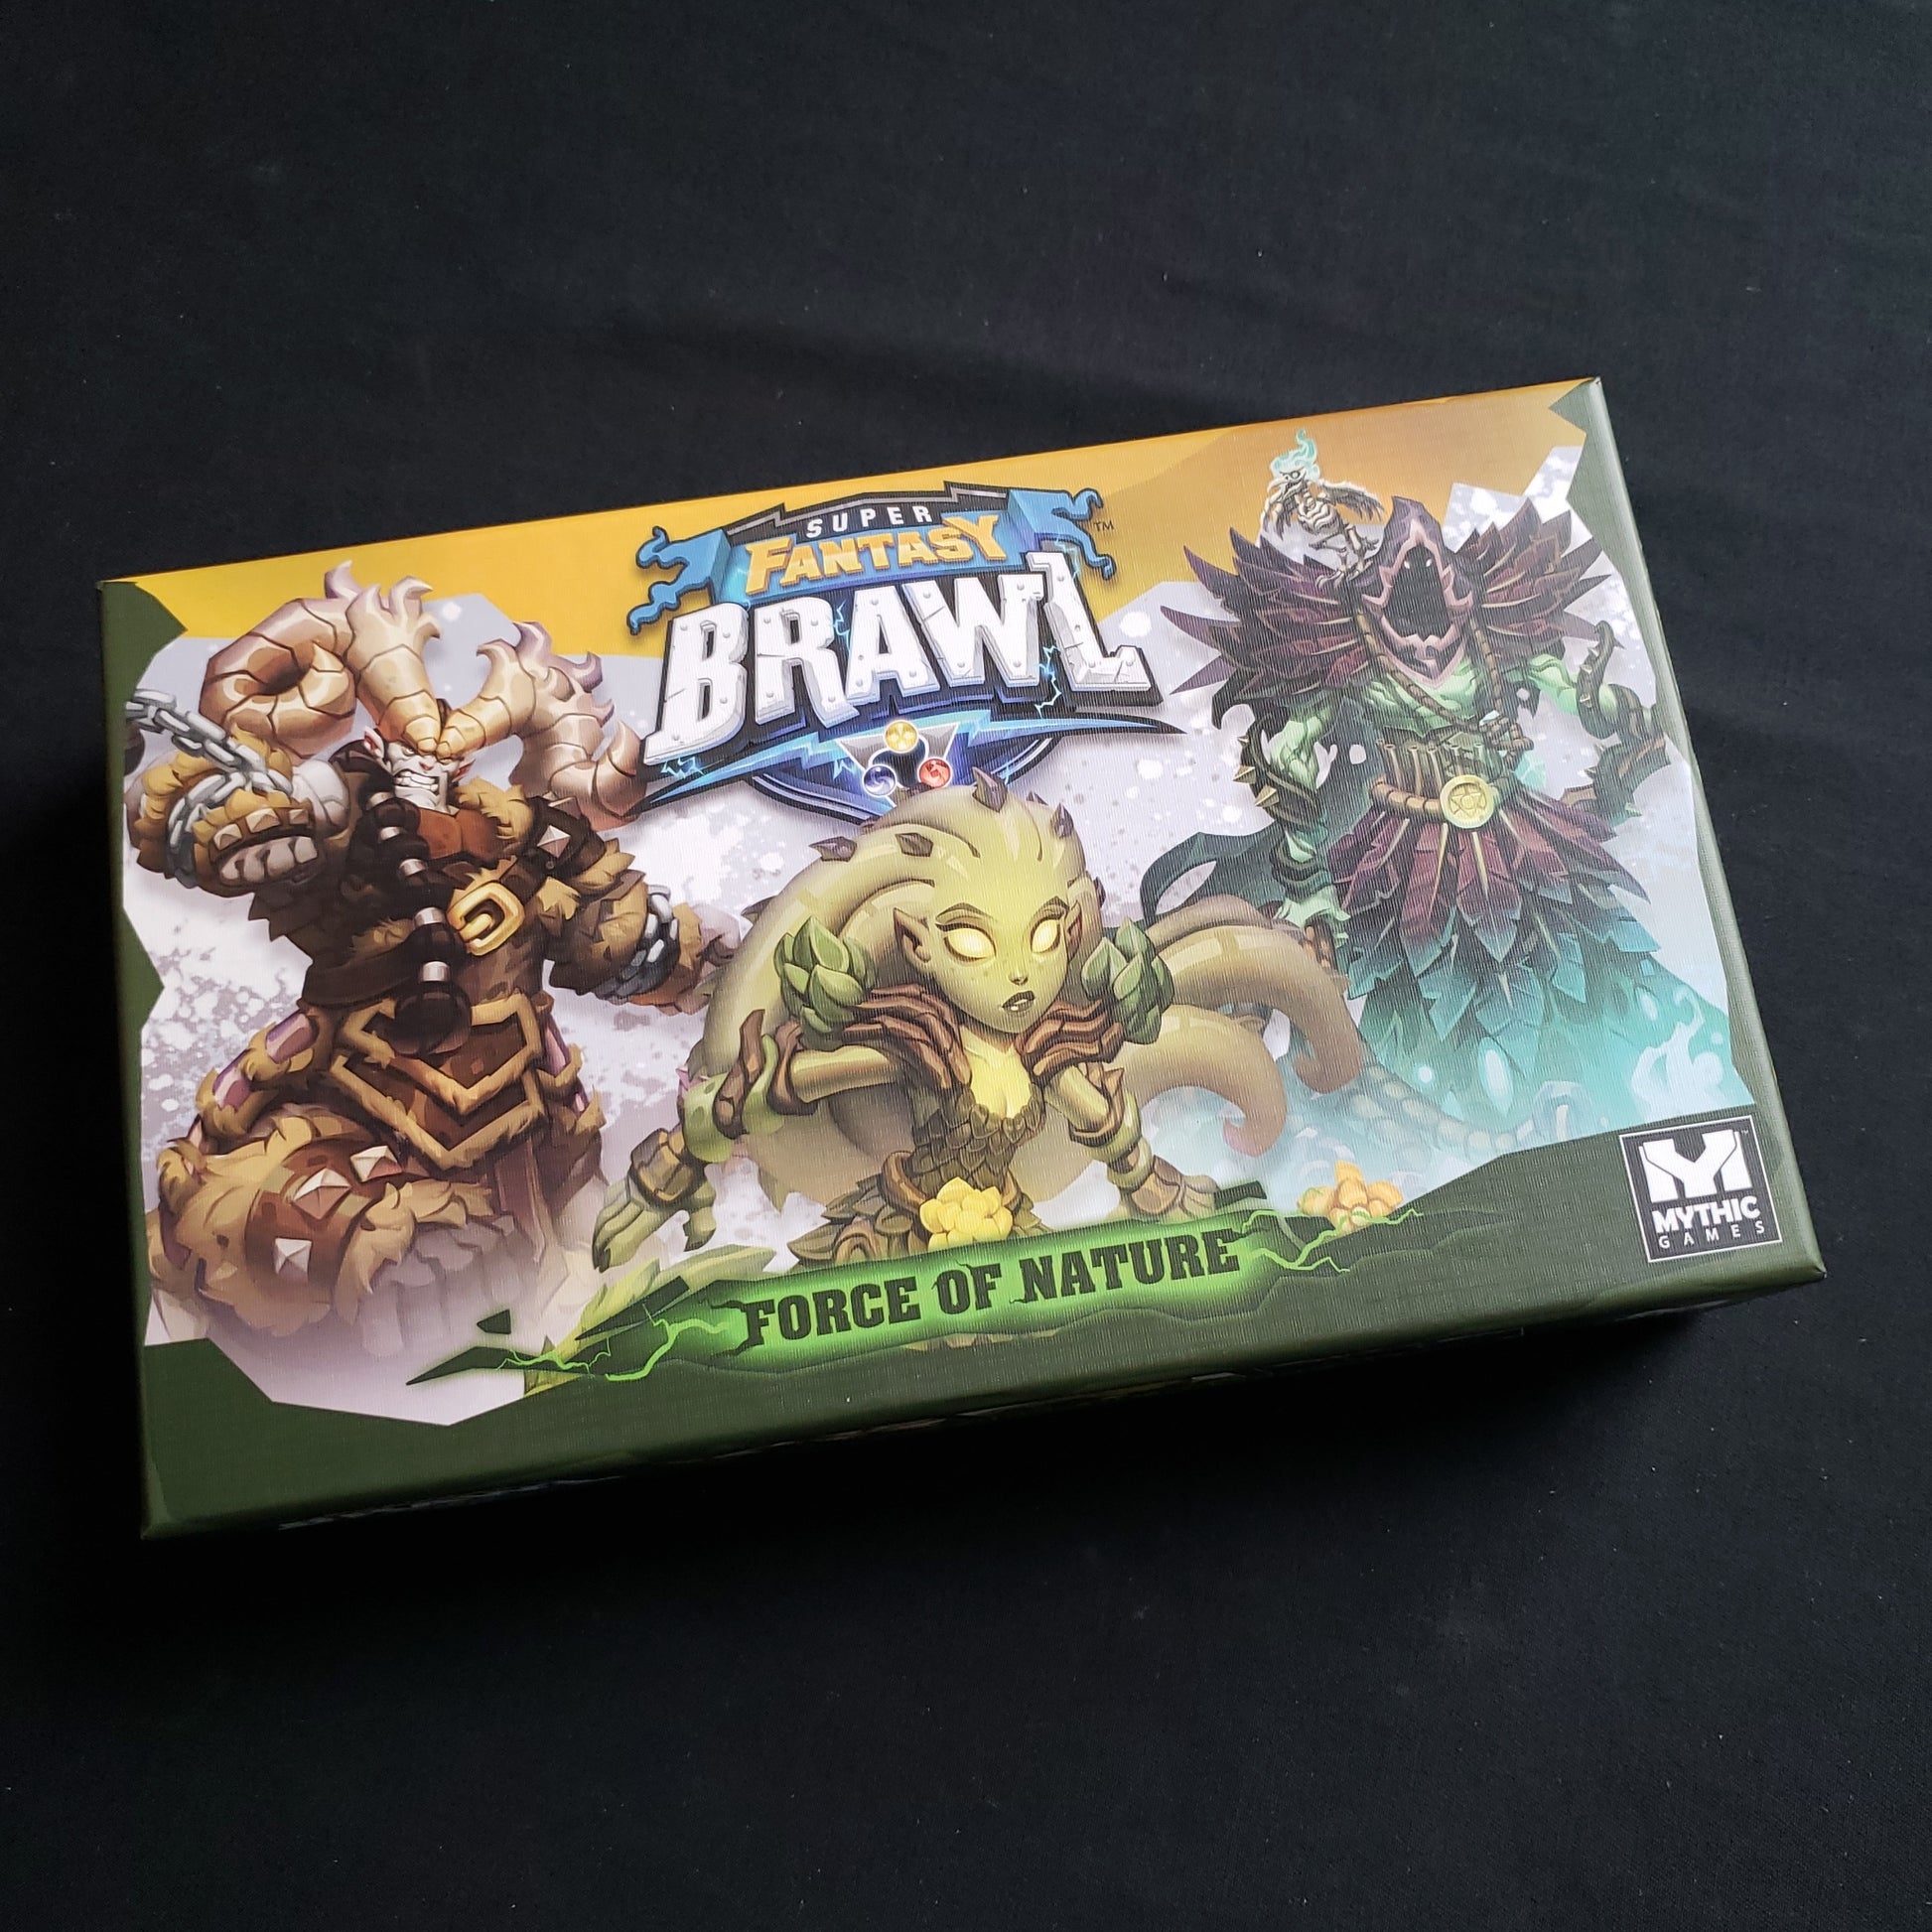 Image shows the front of the box for the Force of Nature Expansion for the Super Fantasy Brawl board game